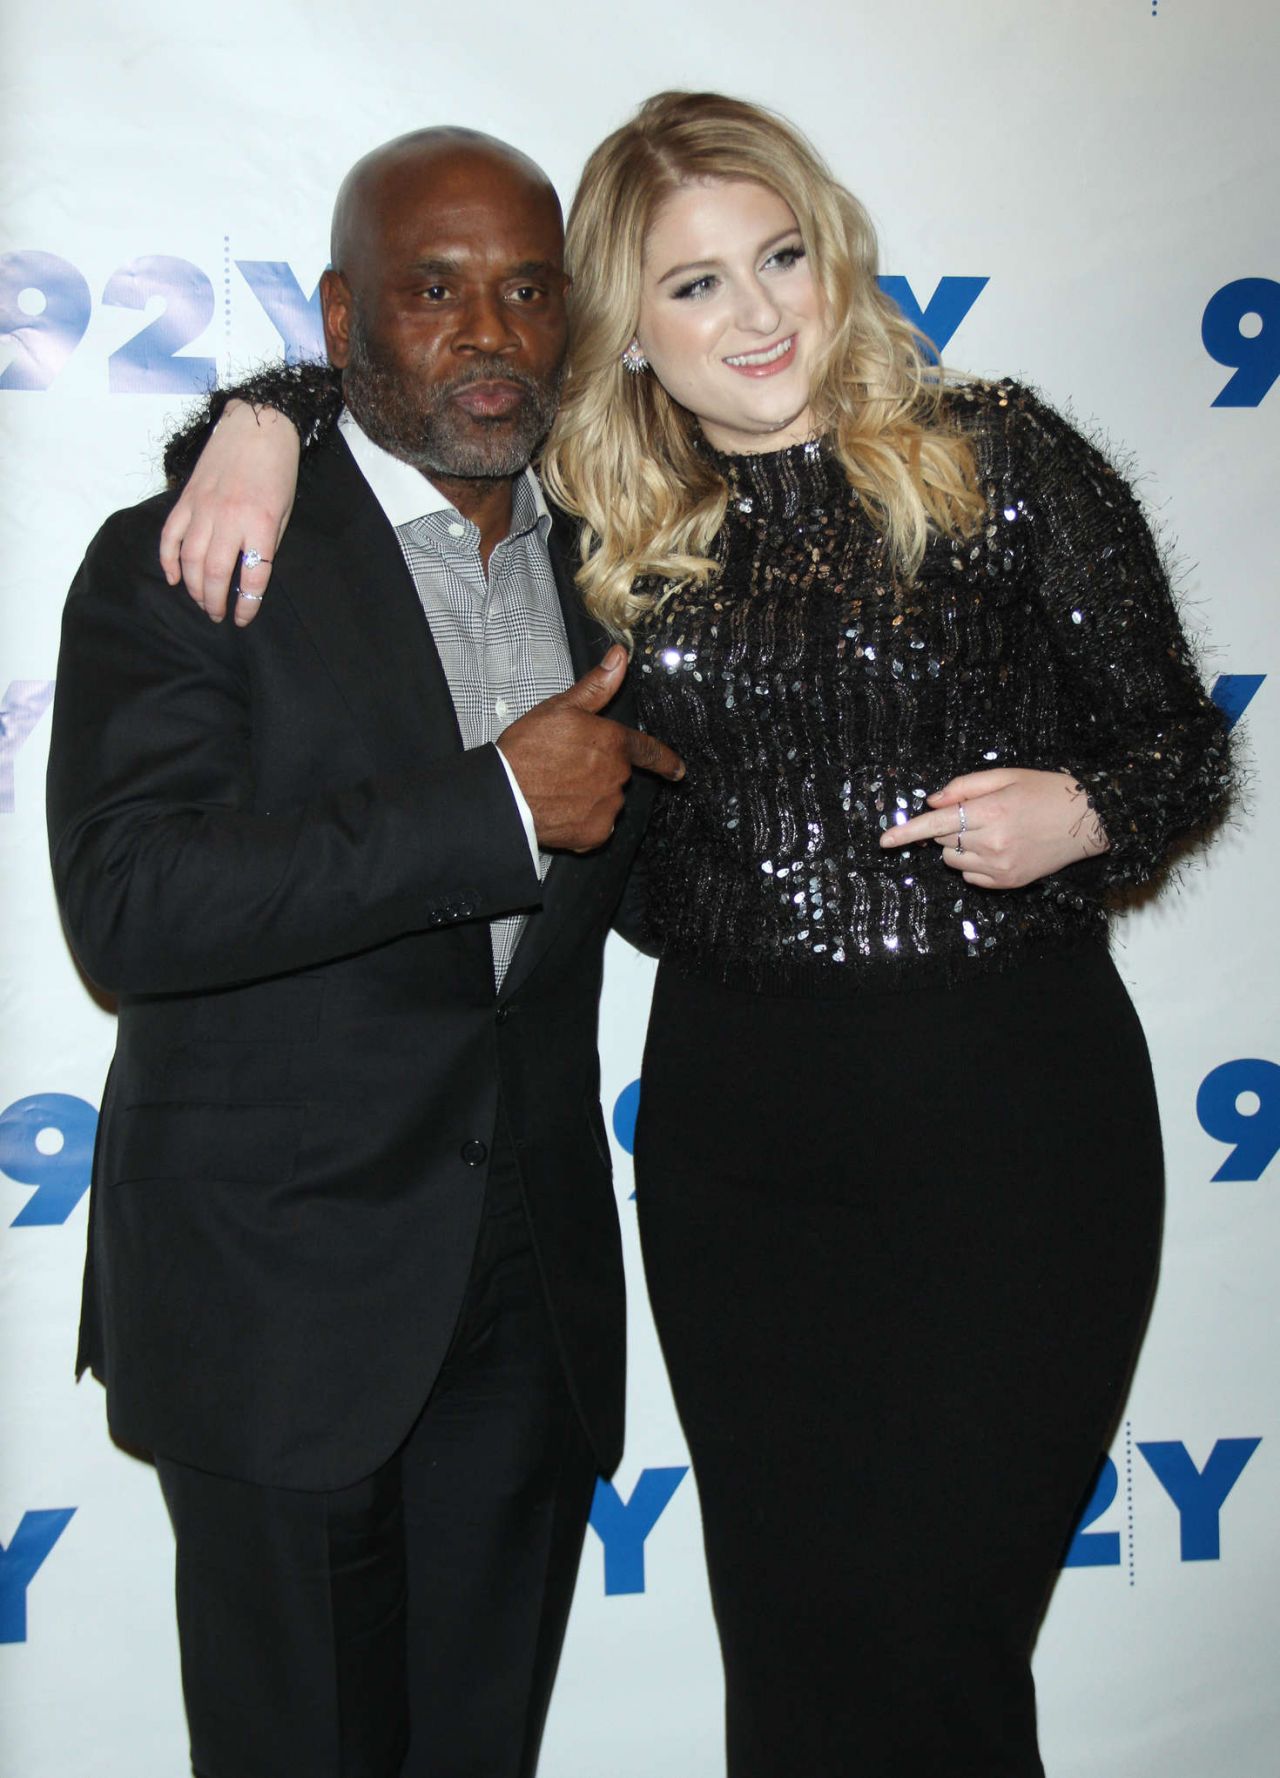 Meghan Trainor - L. A. Reid Conversation With Gayle King in NYC, February 20161280 x 1778